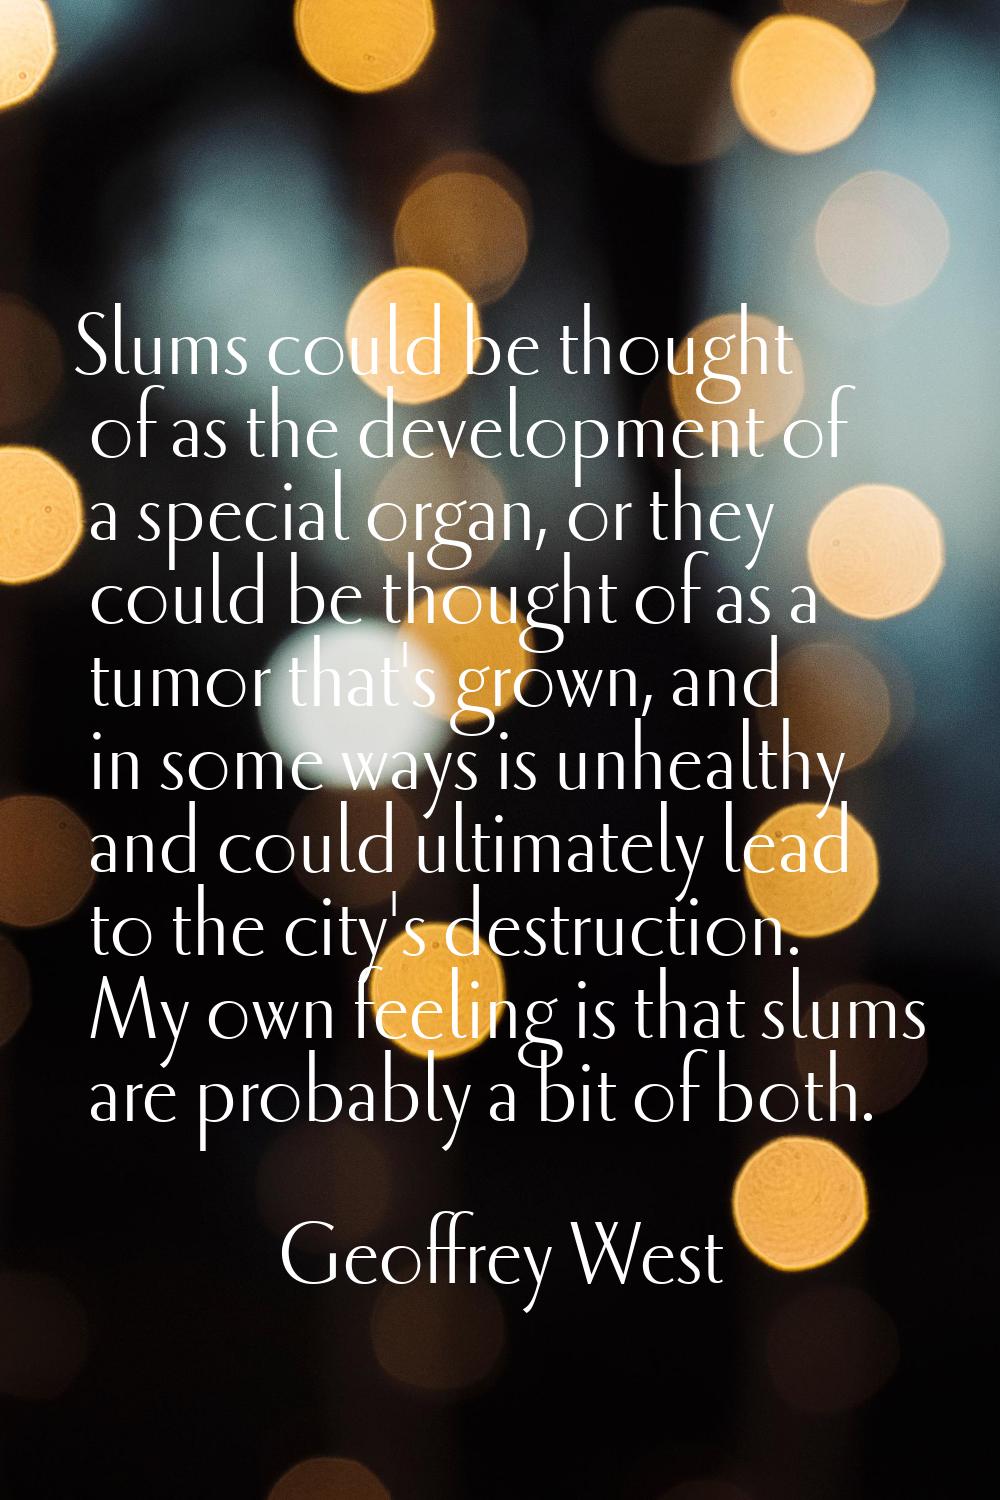 Slums could be thought of as the development of a special organ, or they could be thought of as a t